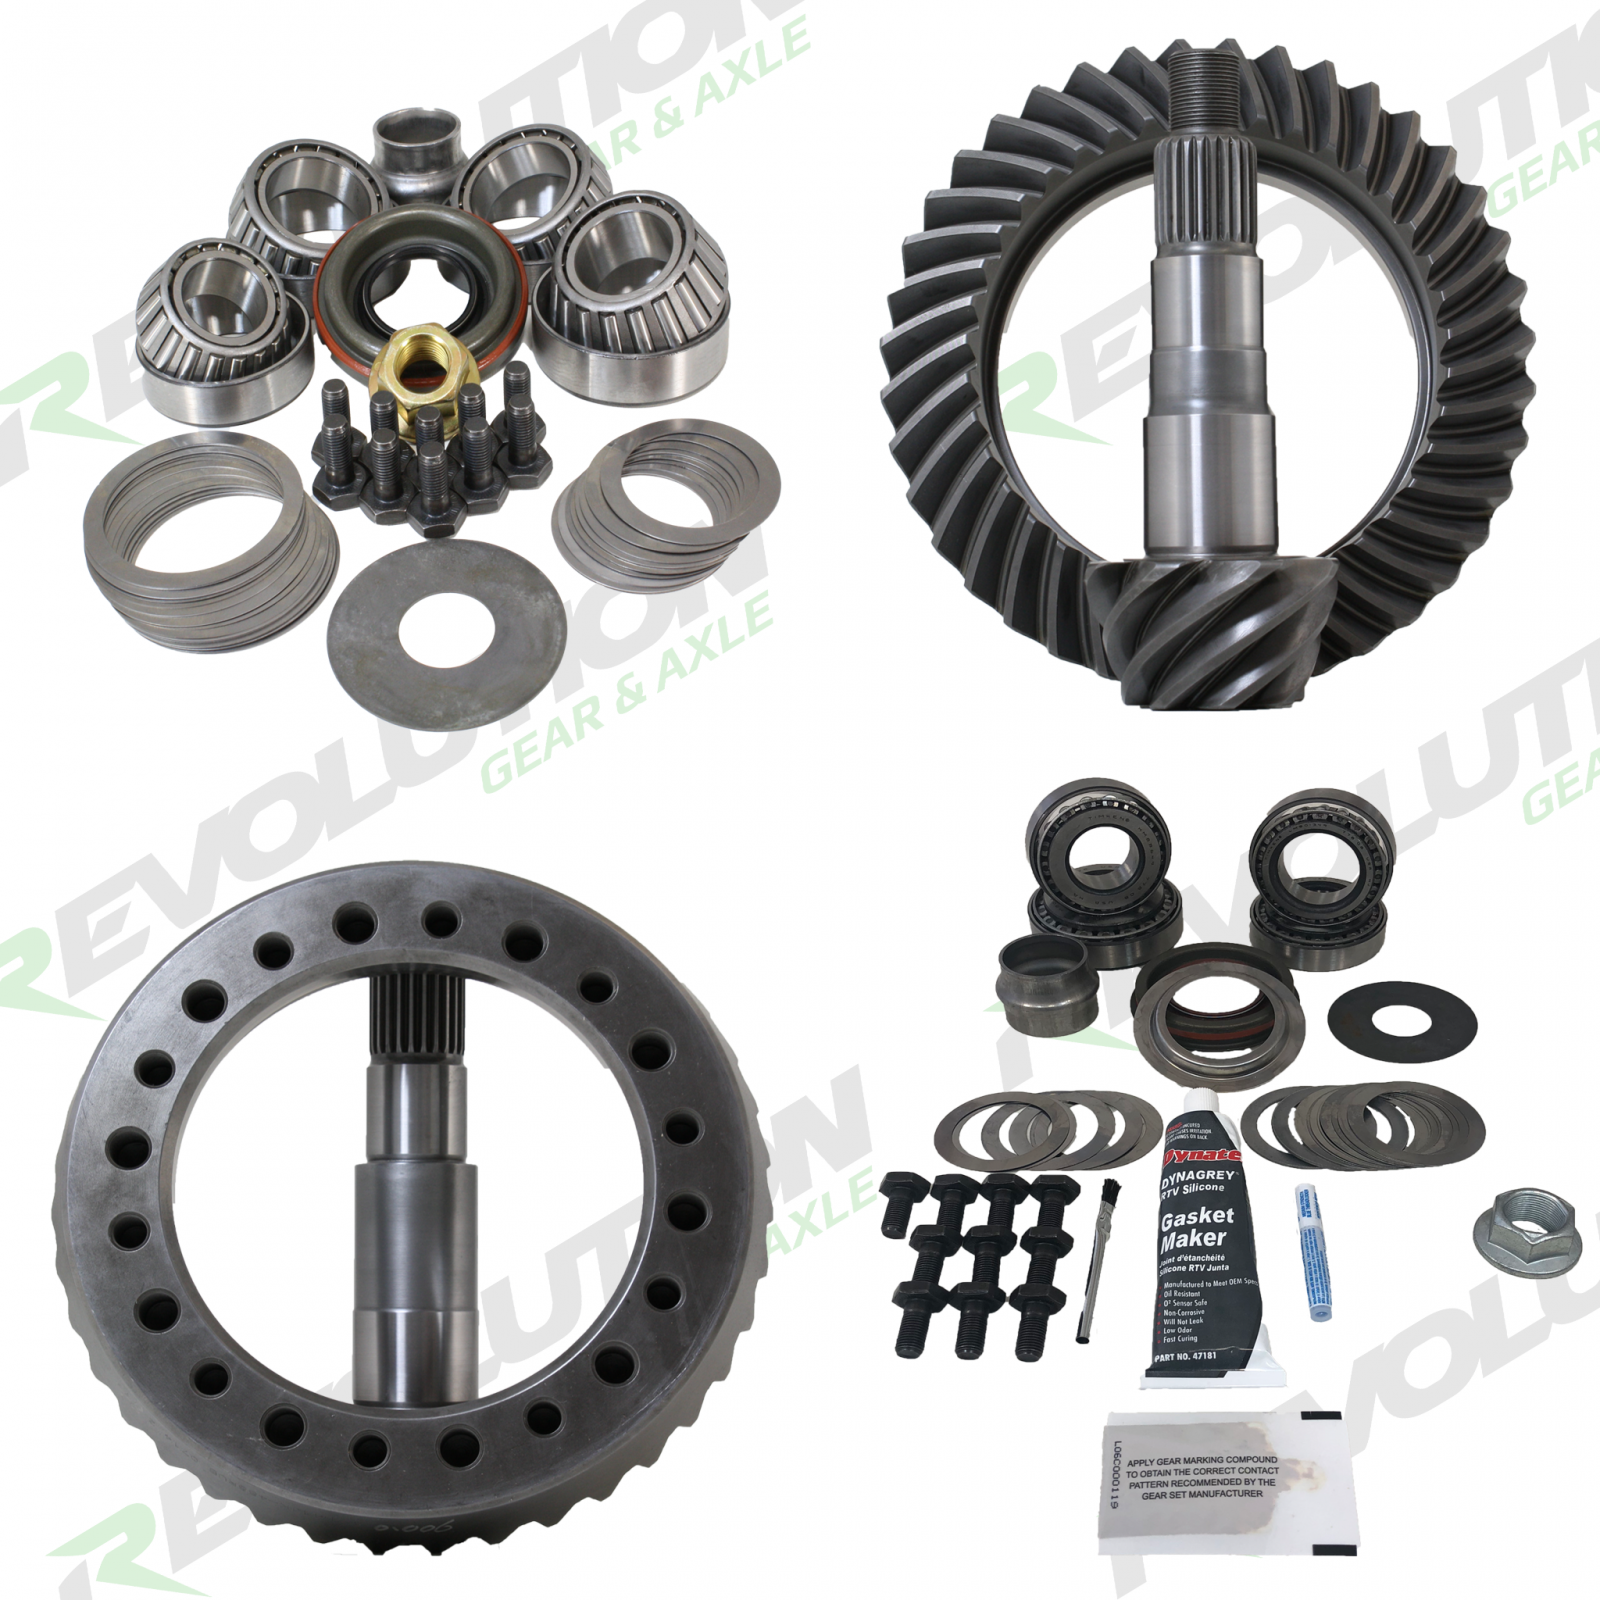 Revolution Gear & Axle Front And Rear Gear Package With Koyo Bearings, Dana 44 Thick-Dana 30, 4.88